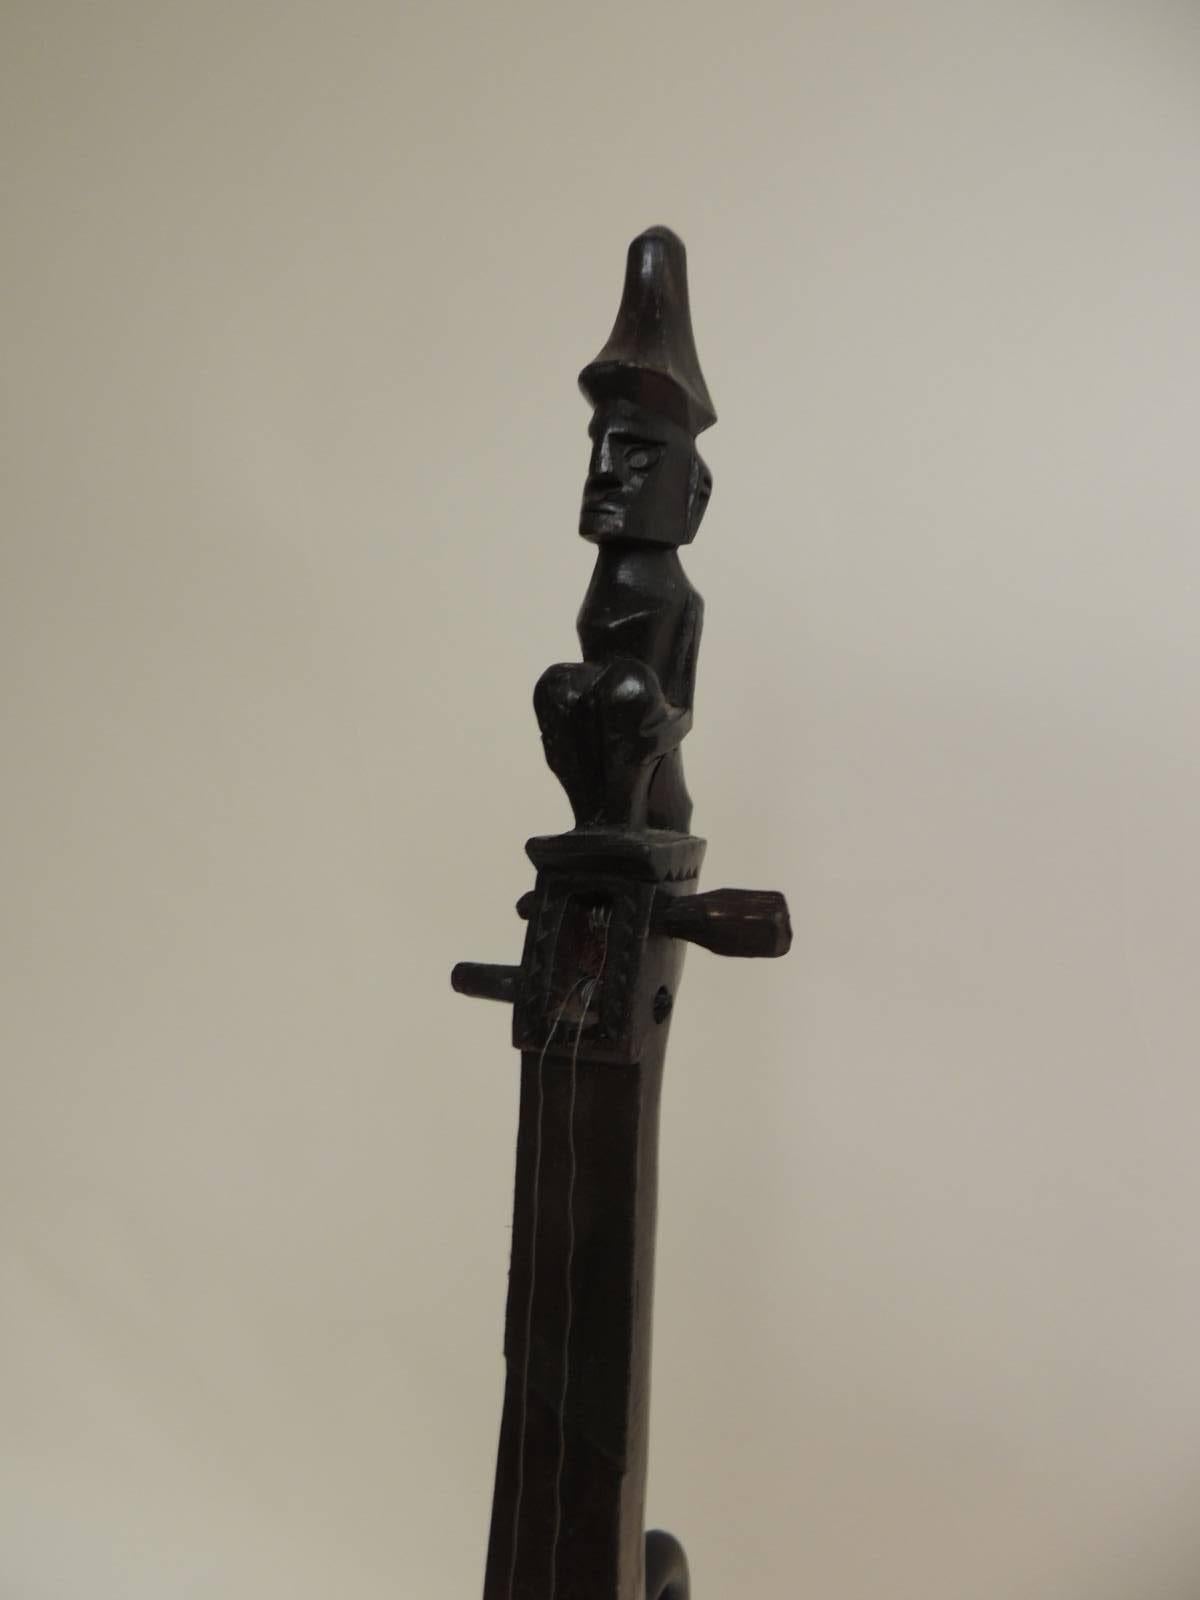 Vintage Indonesian harp instrument on iron stand, told hand-carved wood harp with carved human figure
 on top and carved face figure on the under-side of the harp. The harp is hollow inside. Dark wood stained patina.
Note: The iron stands are